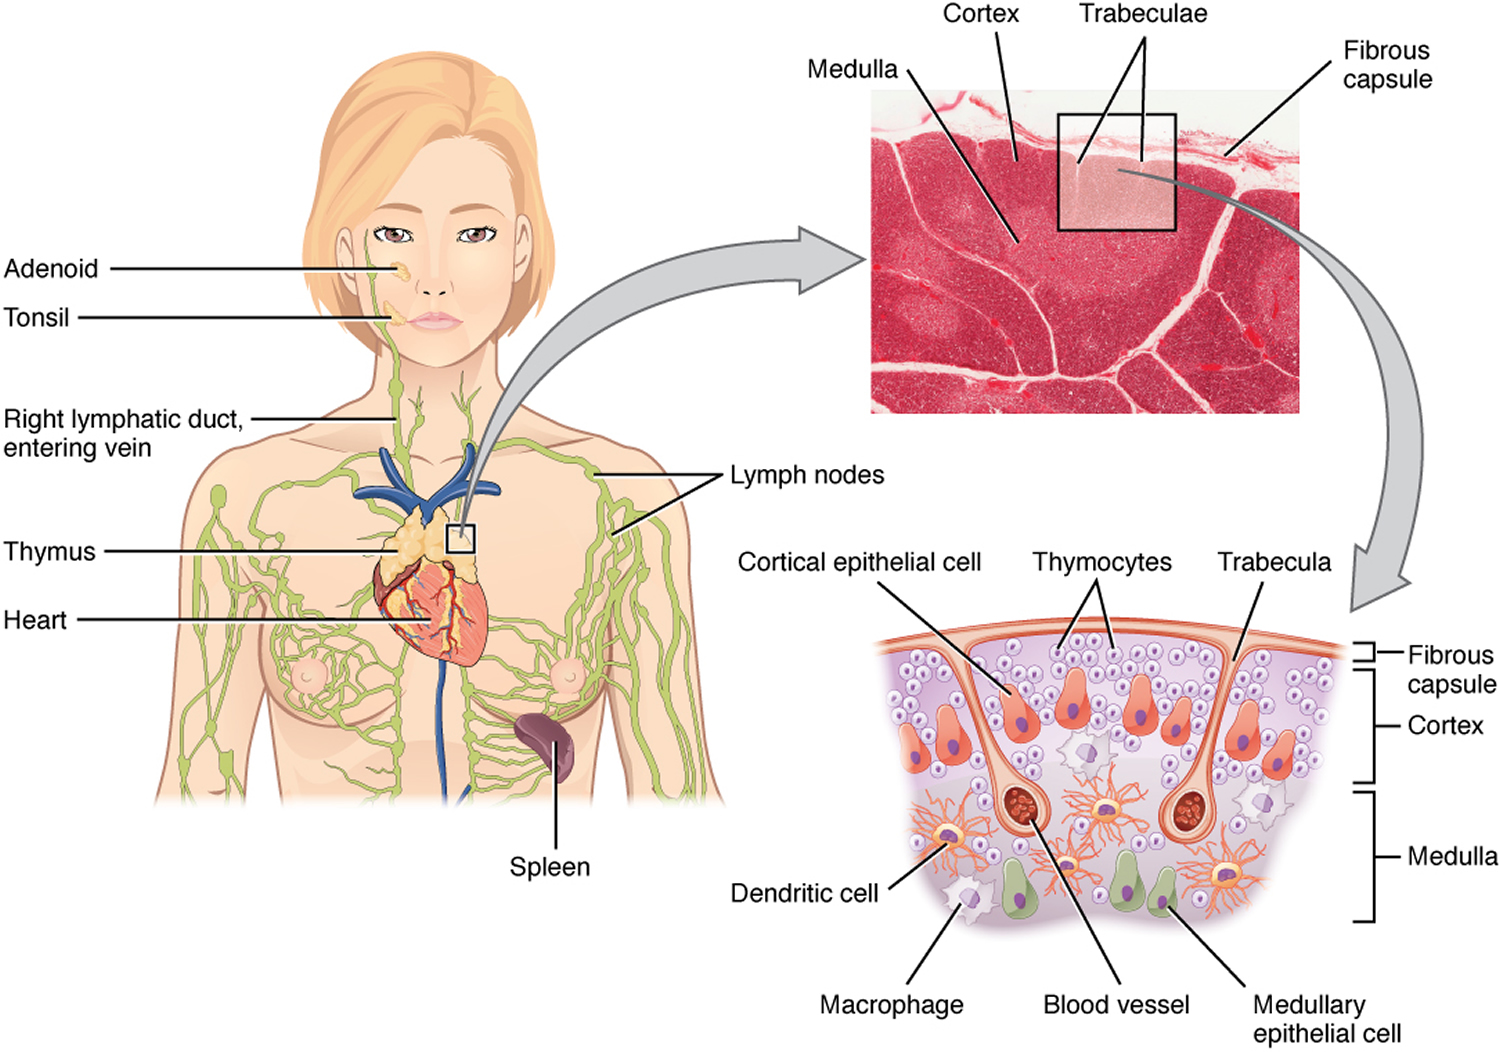 Thymus Function, Locations and Role in Immune System